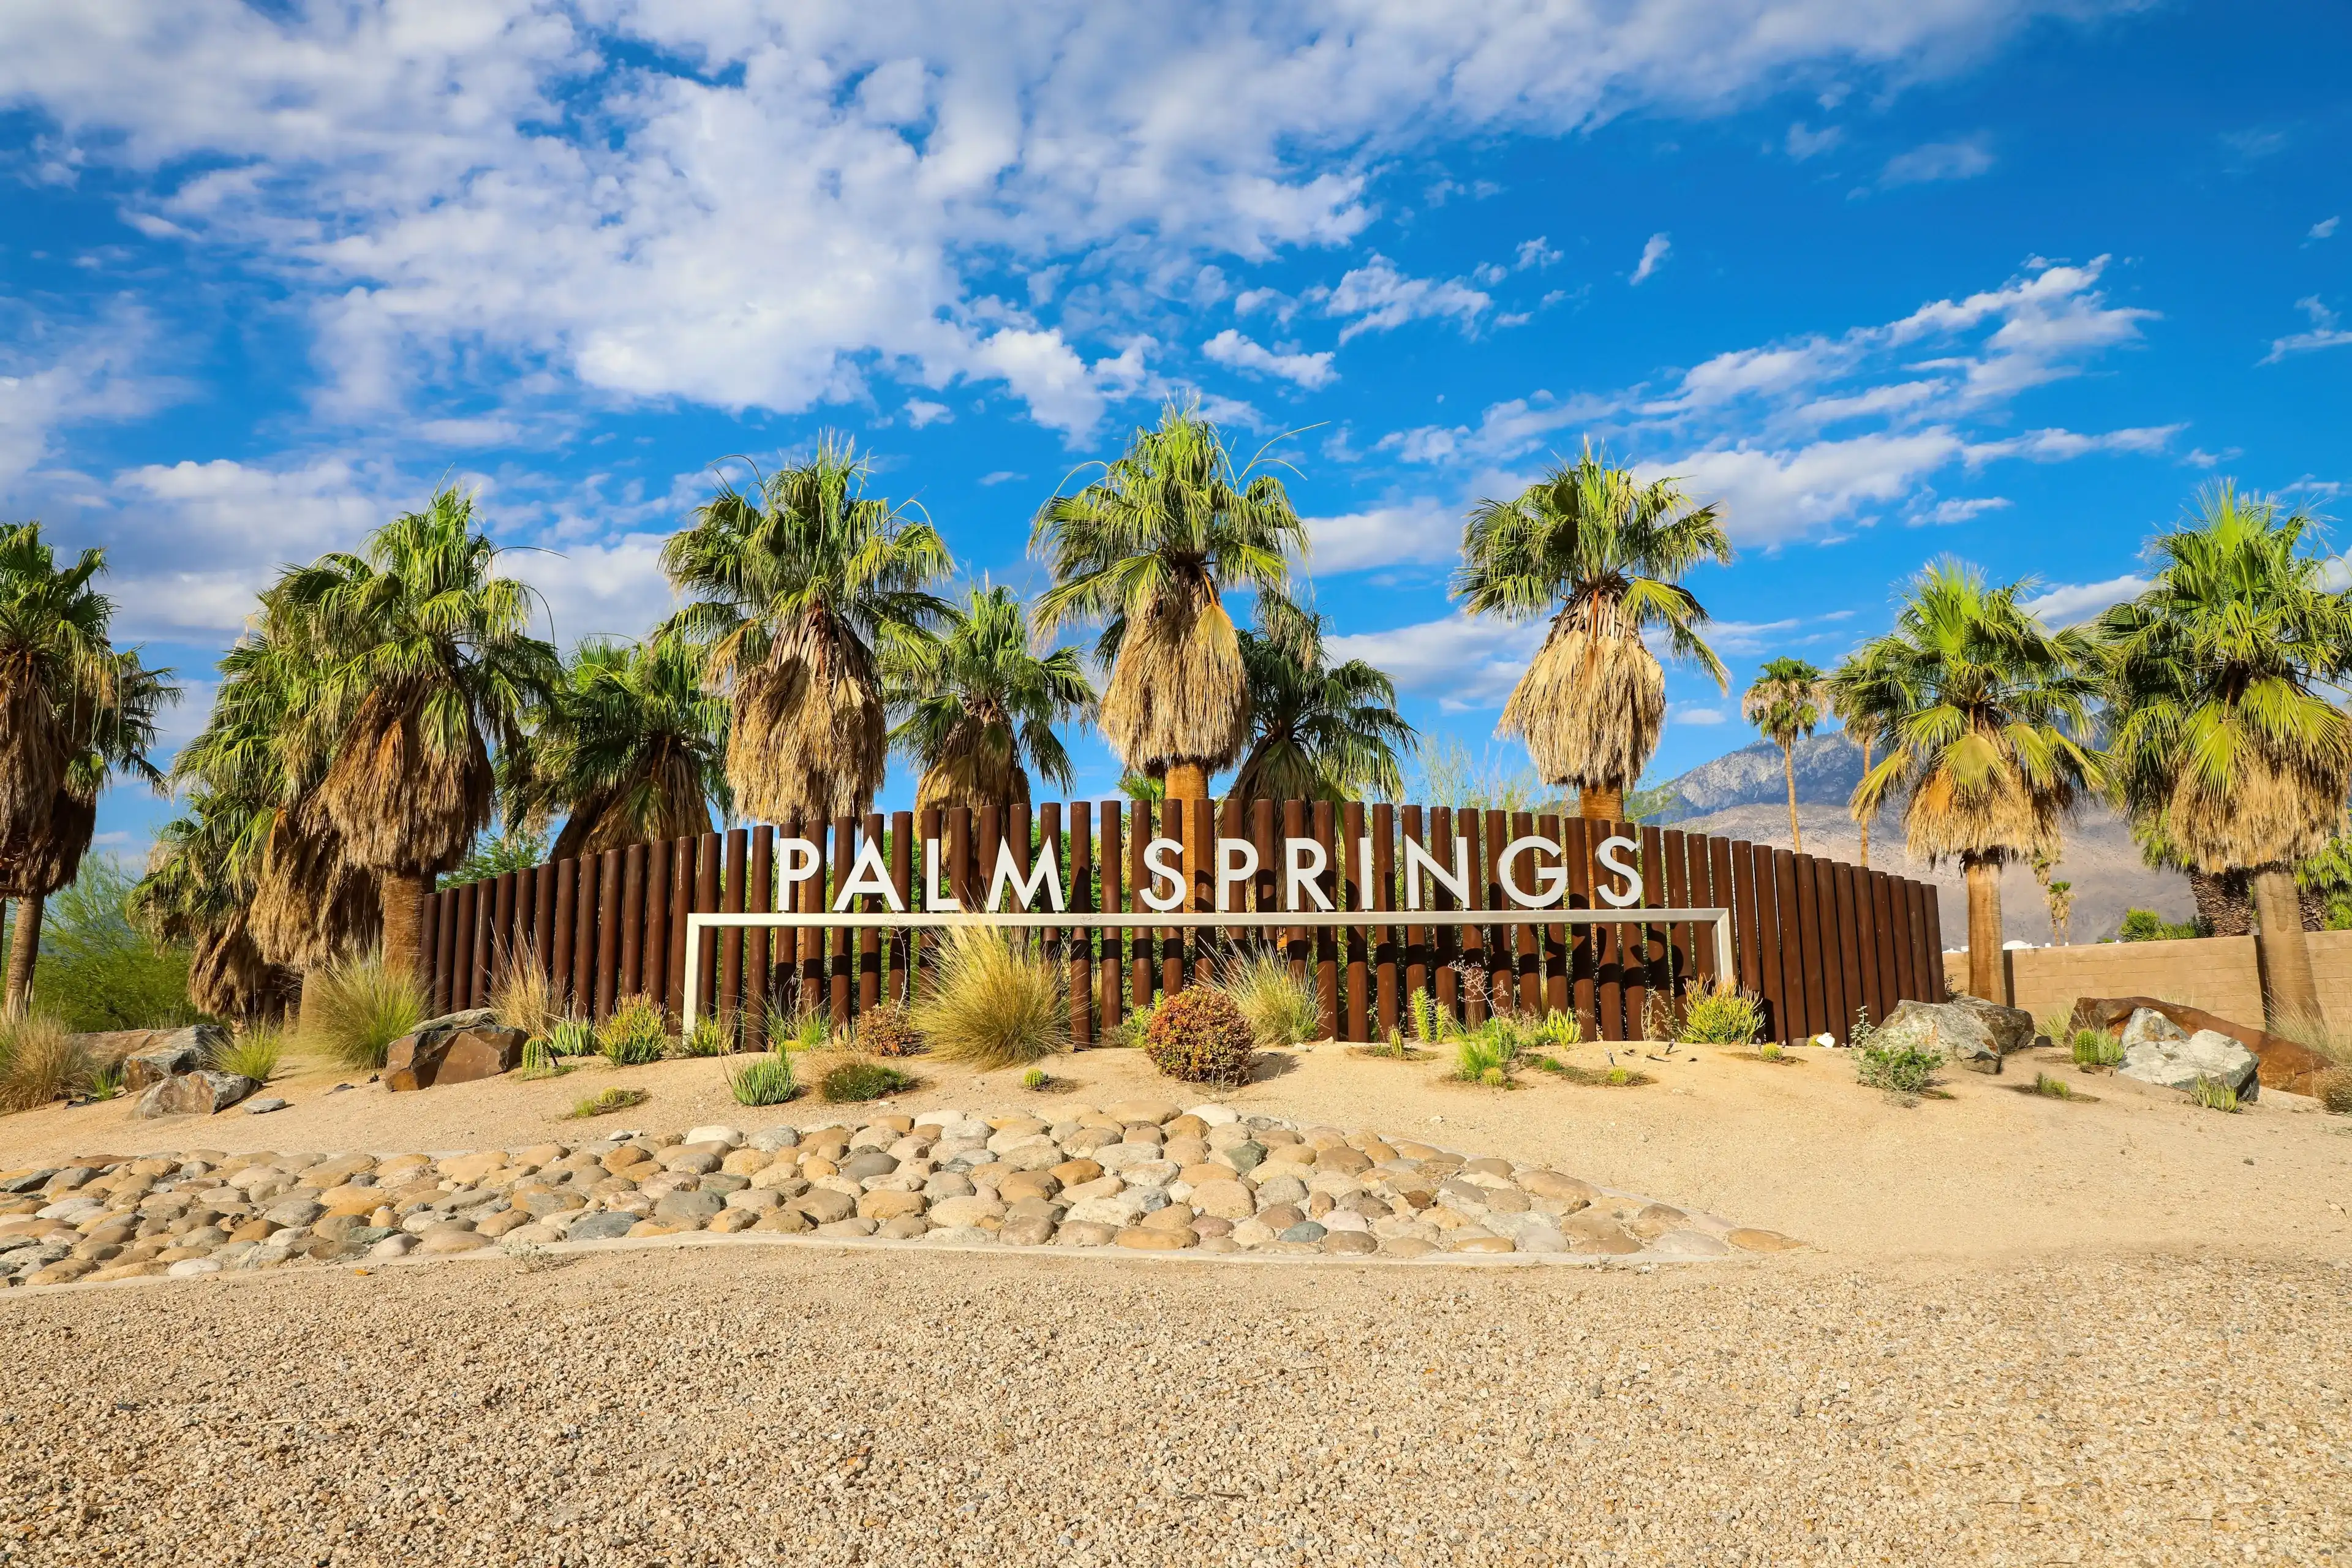 Best Palm Springs hotels. Cheap hotels in Palm Springs, California, United States